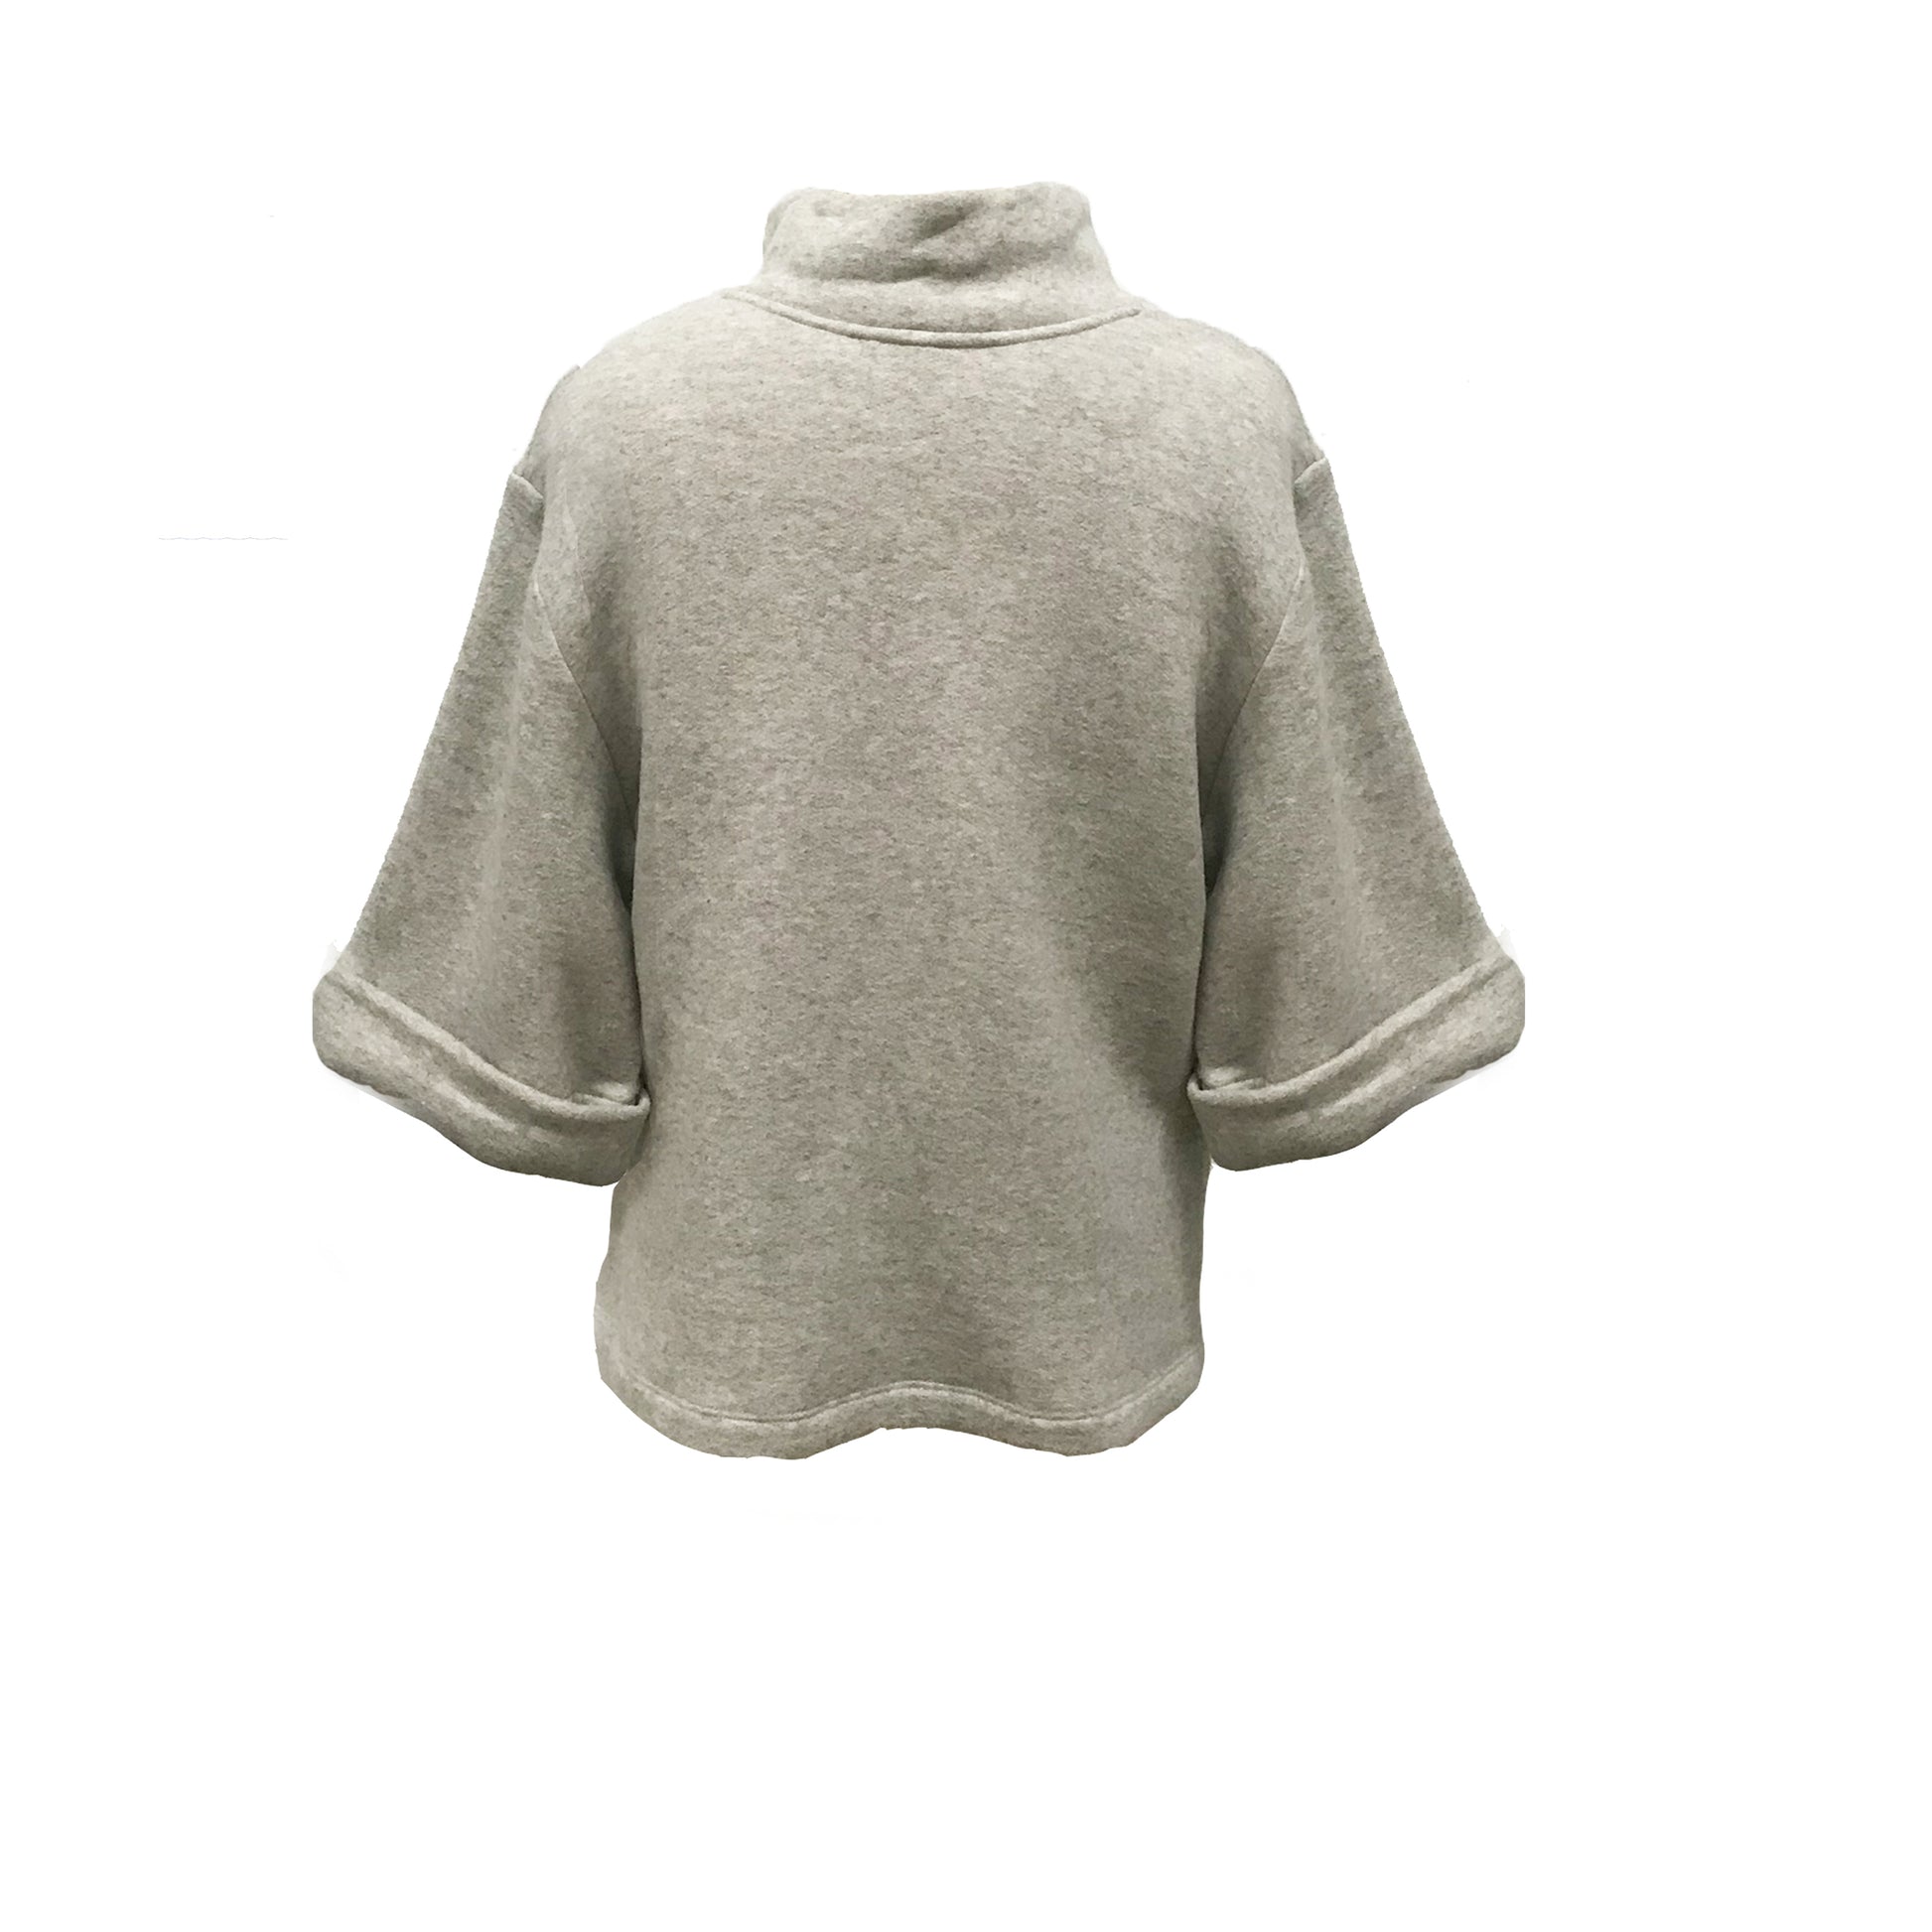 Gray sweater with short sleeves and fold over collar